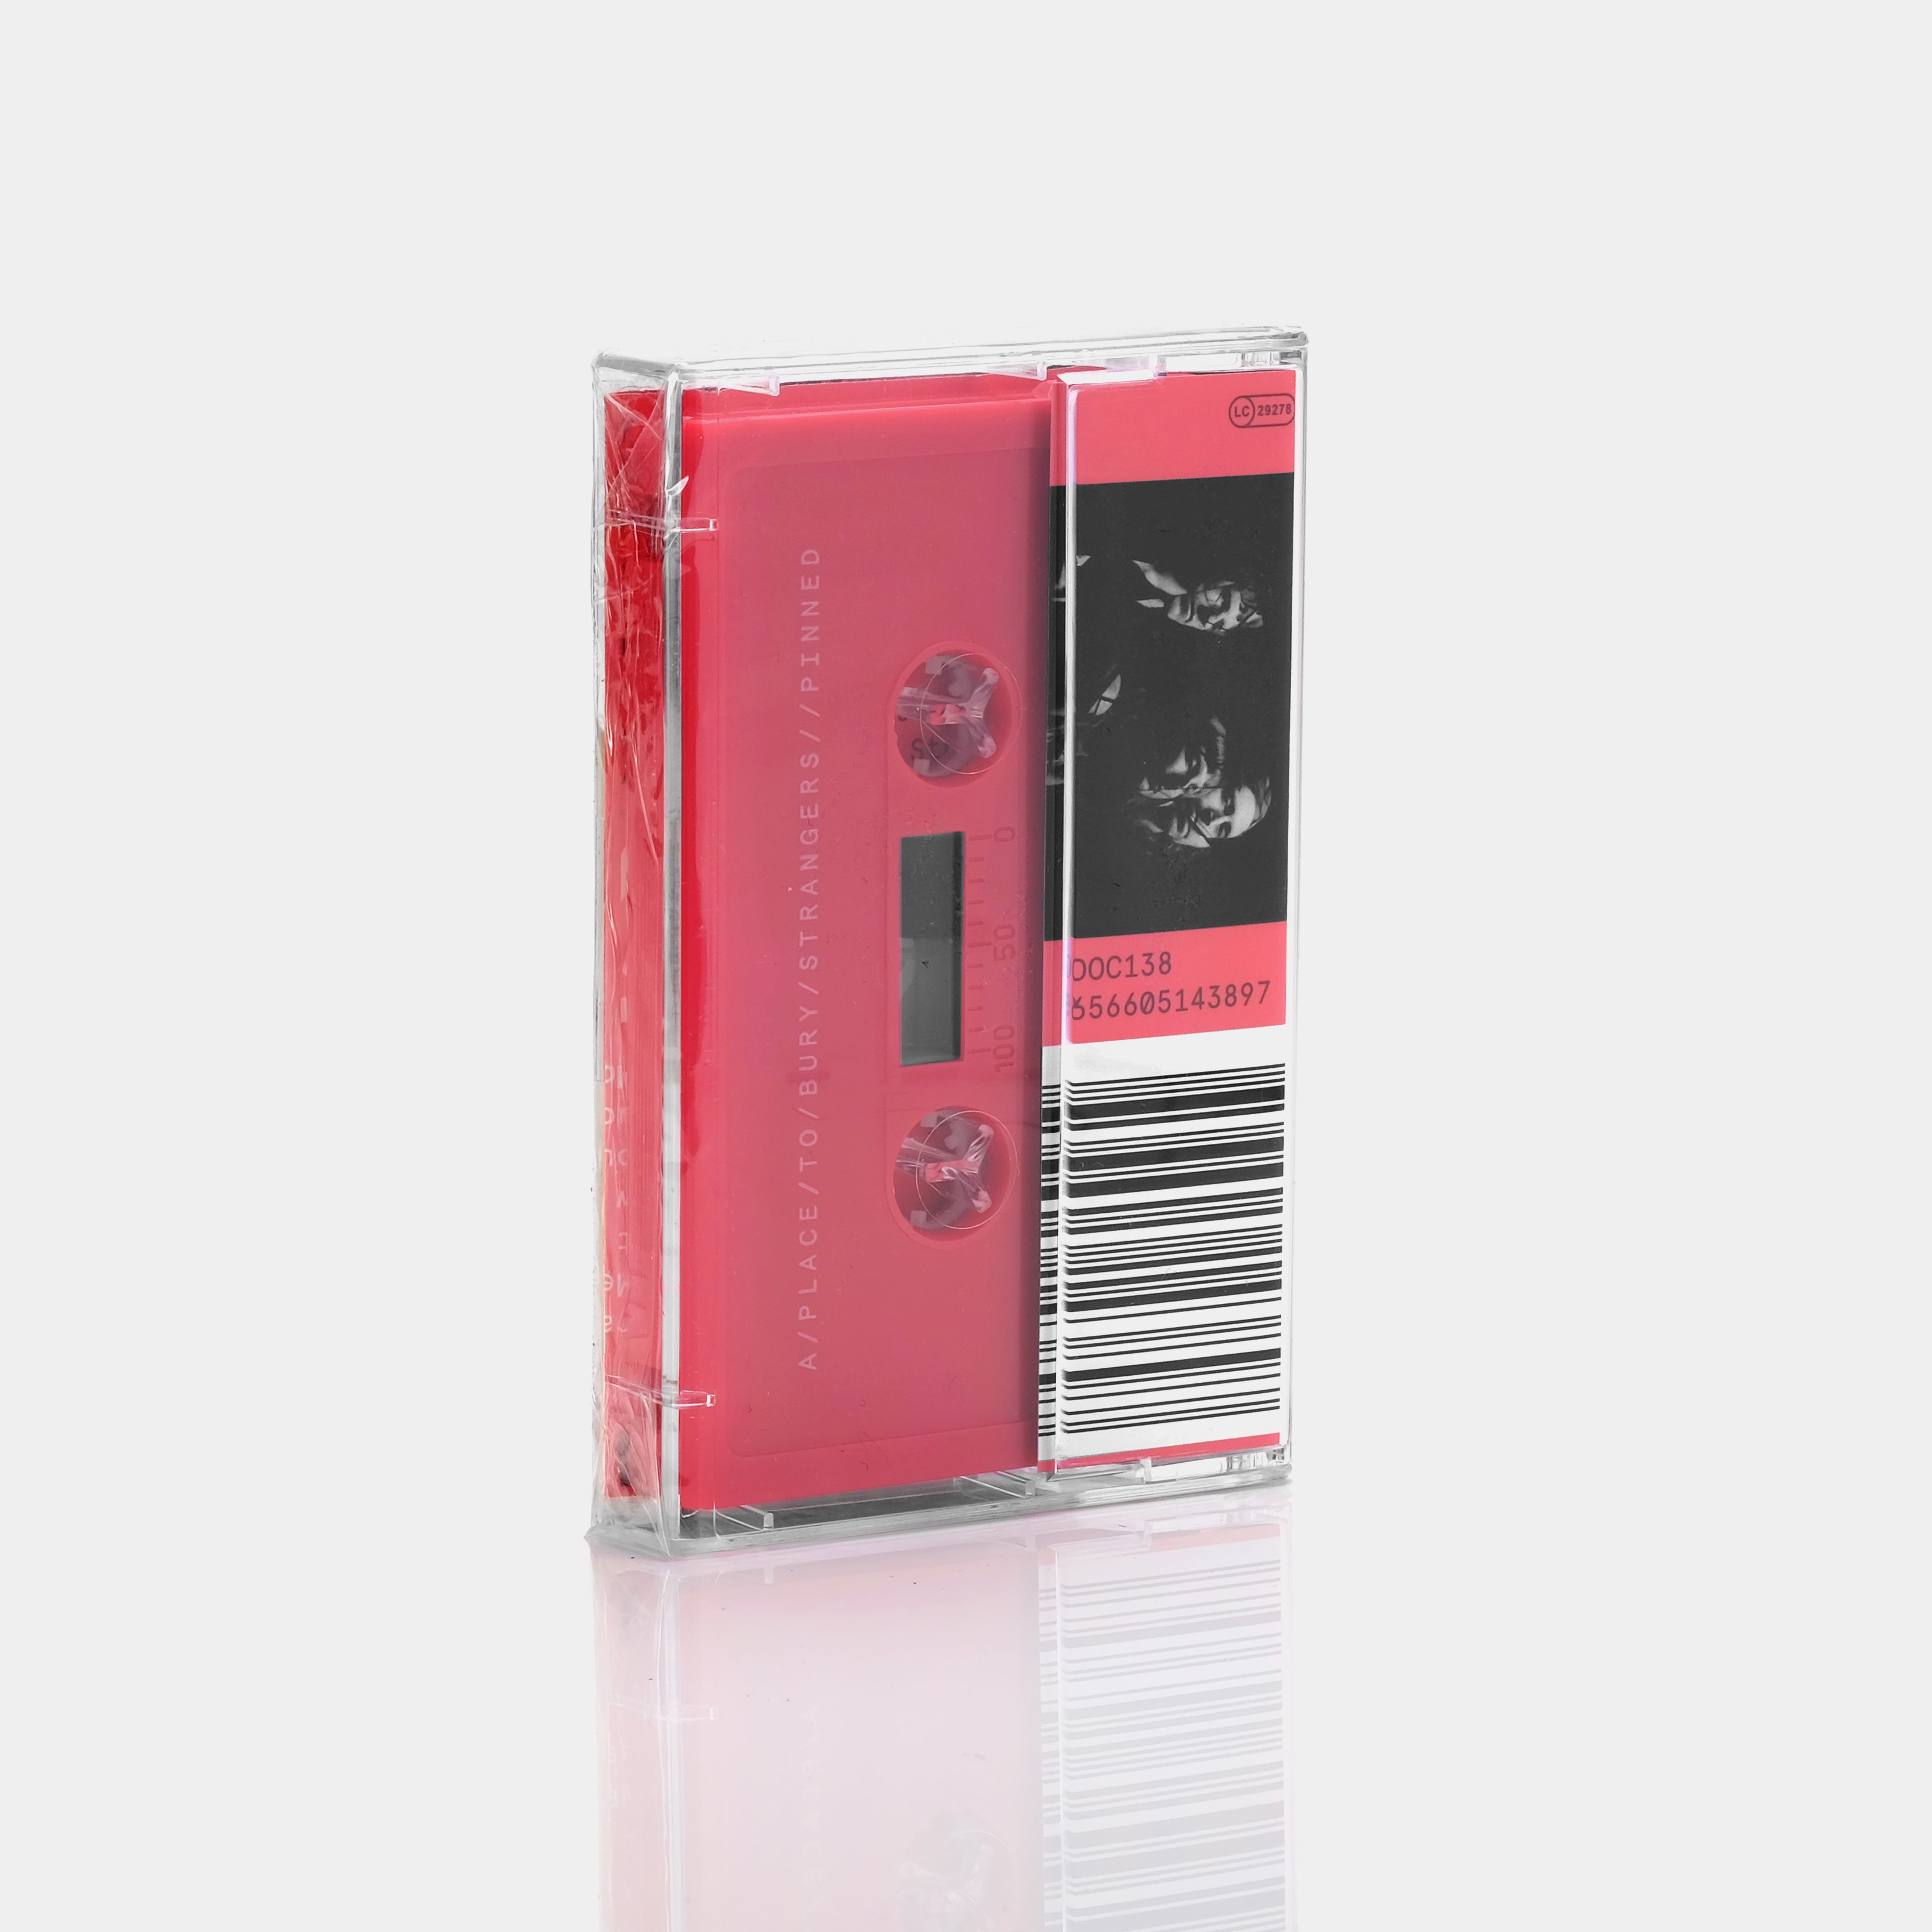 A Place To Bury Strangers - Pinned Cassette Tape